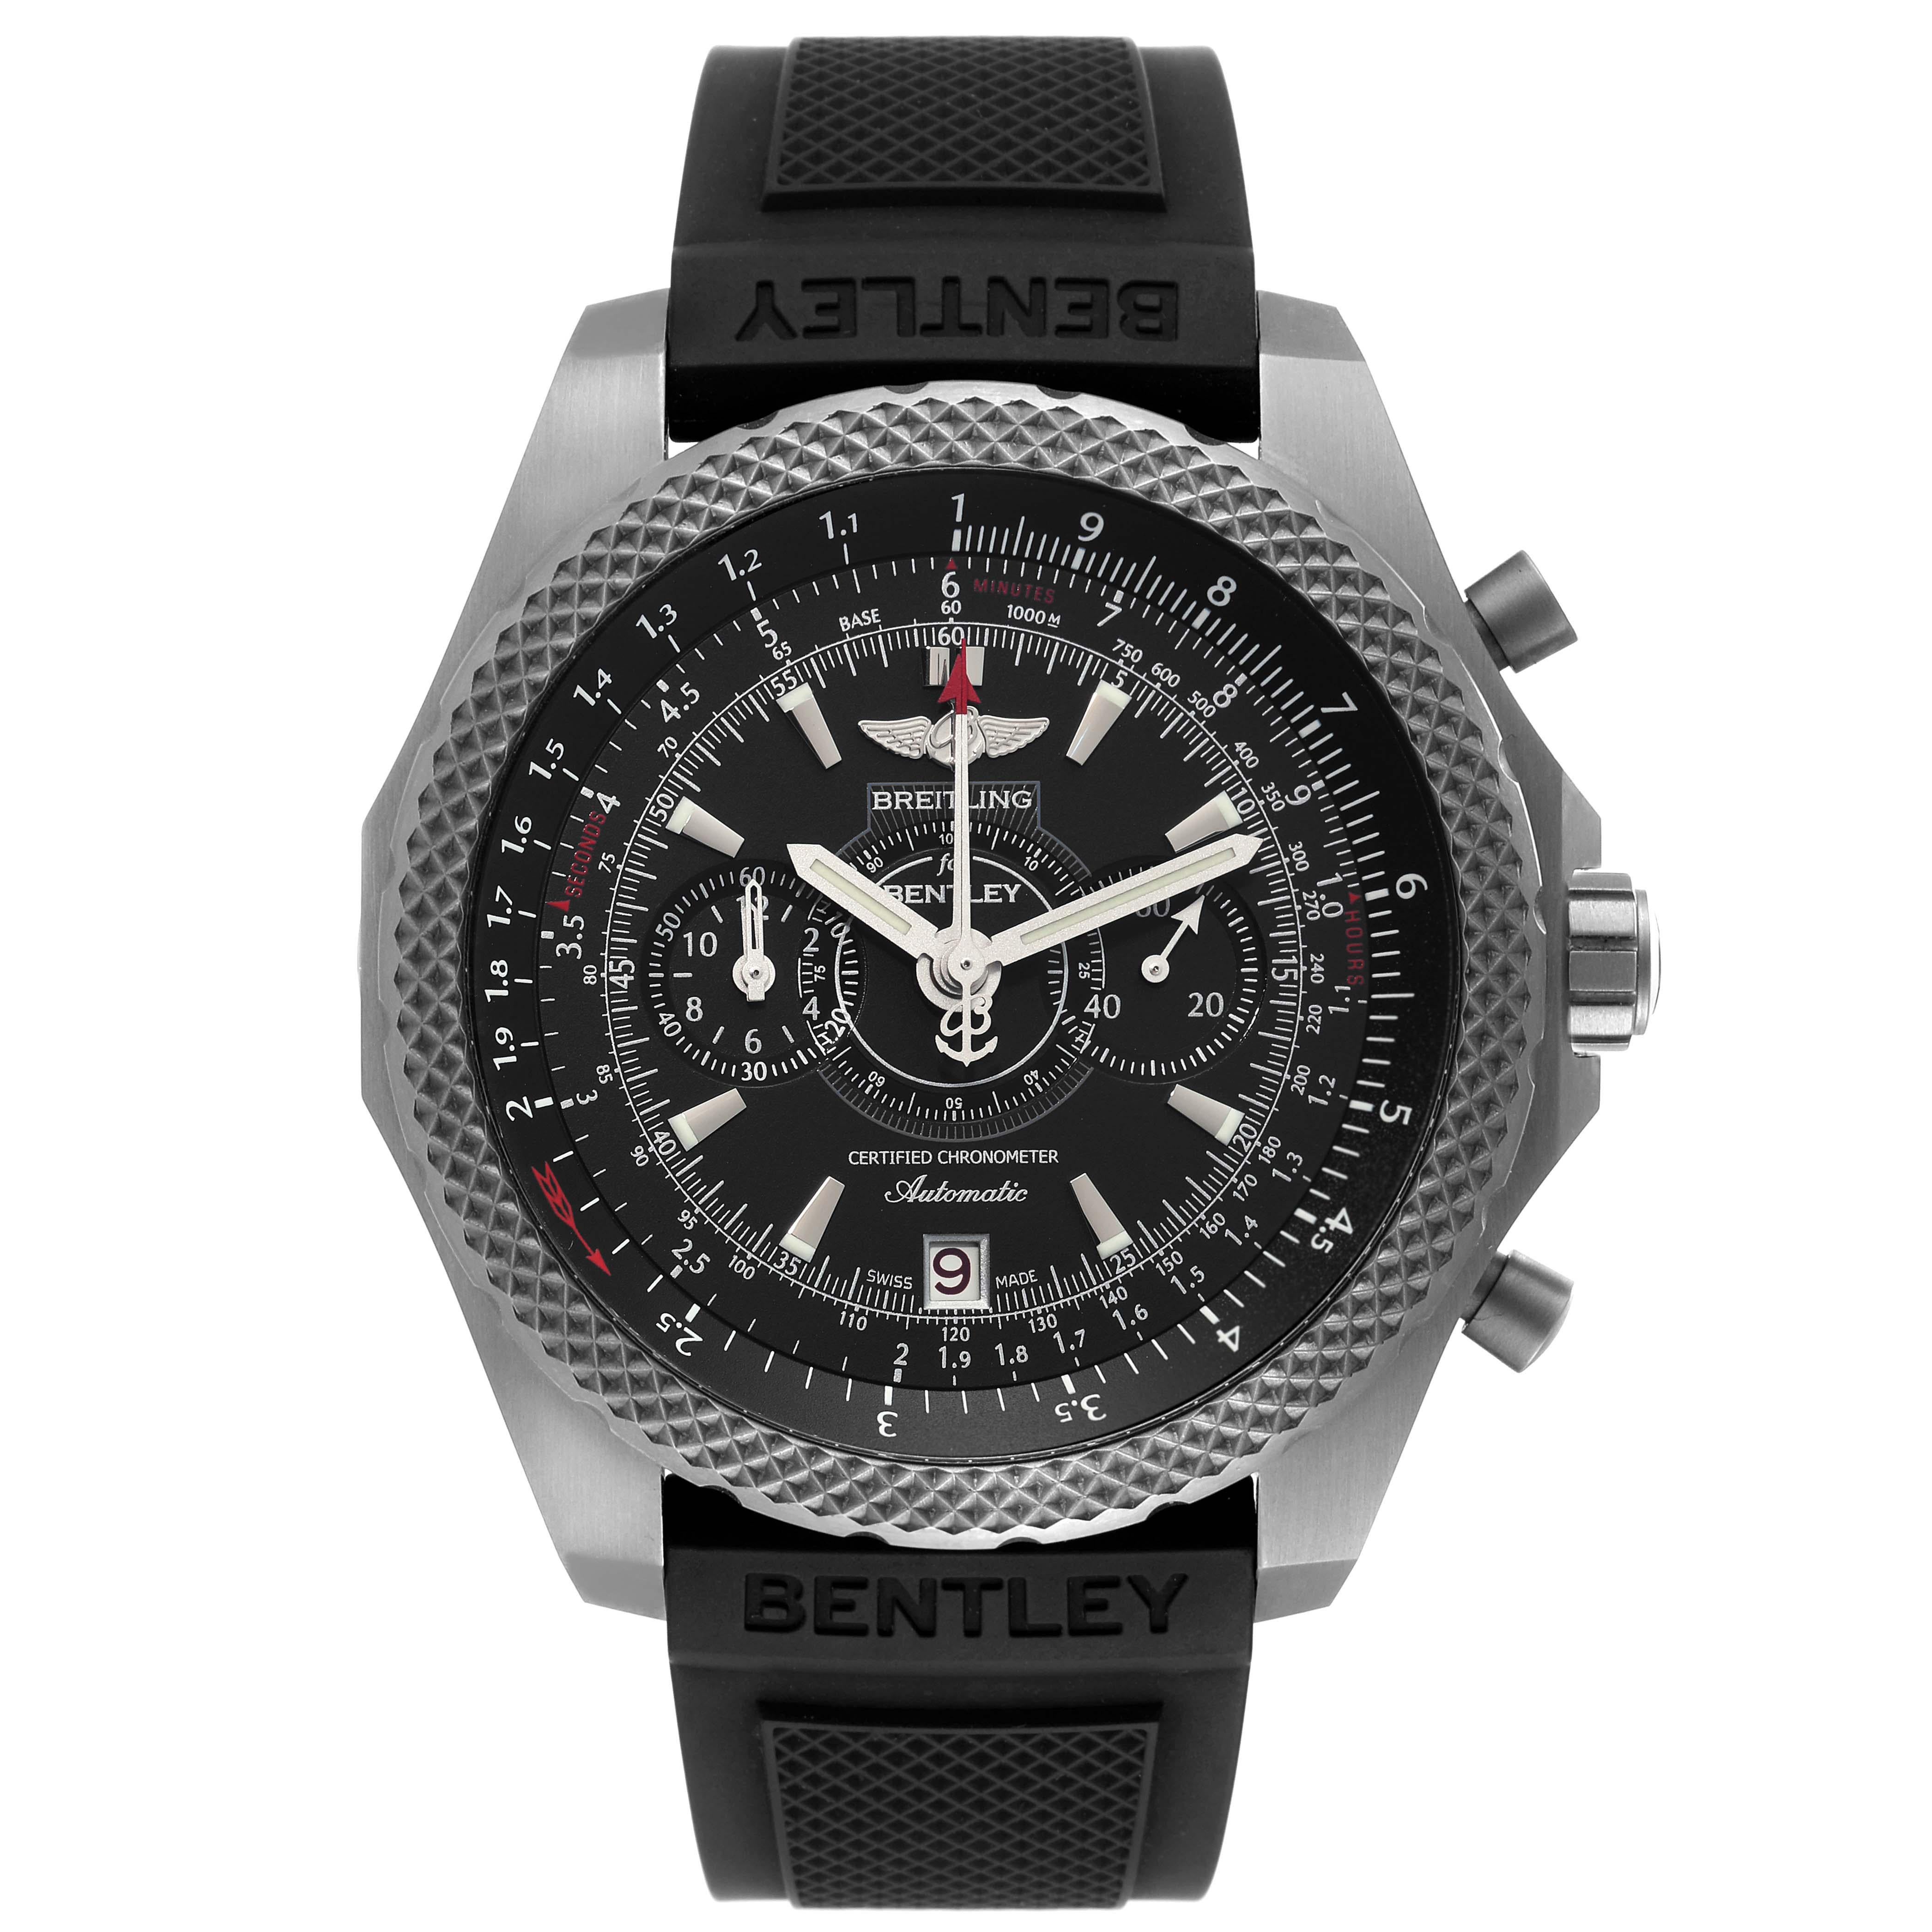 Breitling Bentley Super Sports LE Titanium Mens Watch E27365 Box Card. Automatic self-winding officially certified chronometer movement. Chronograph function. Titanium case 49.0 mm in diameter. Titanium pushers and screwed-down crown. Titanium